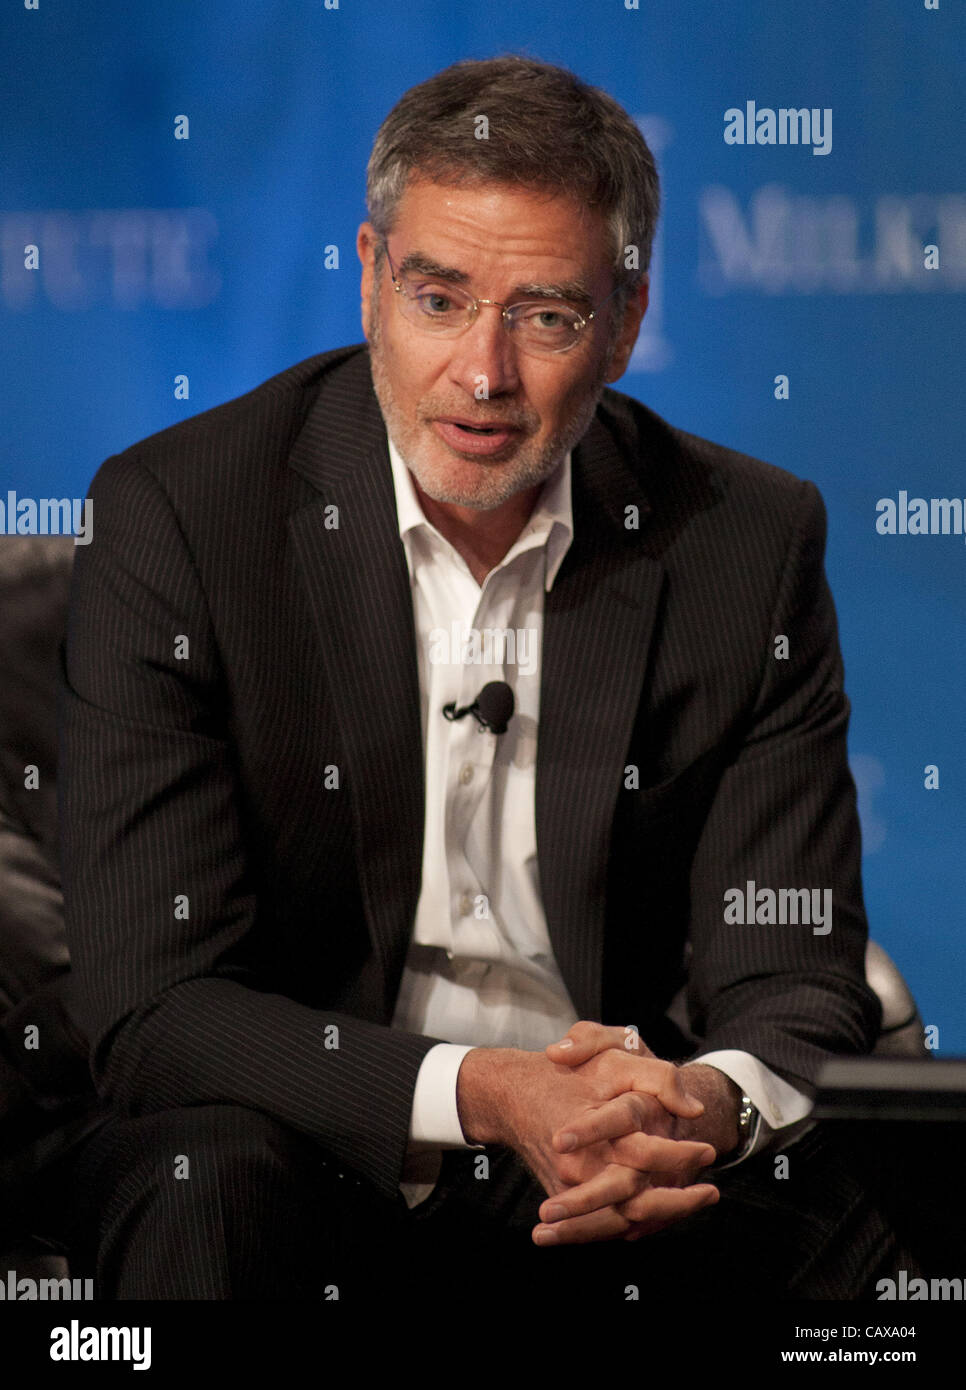 May 1, 2012 - Beverly Hills, California, USA - Robert Pittman, CEO, Clear Channel Communications; Founder, MTV at the panel discussion entitled 'Evolving Media: Will Content, Distribution or New Platforms Dominate?'  during the Milken Institute Global Conference held Tuesday, May 1, 2012 at the Hilt Stock Photo